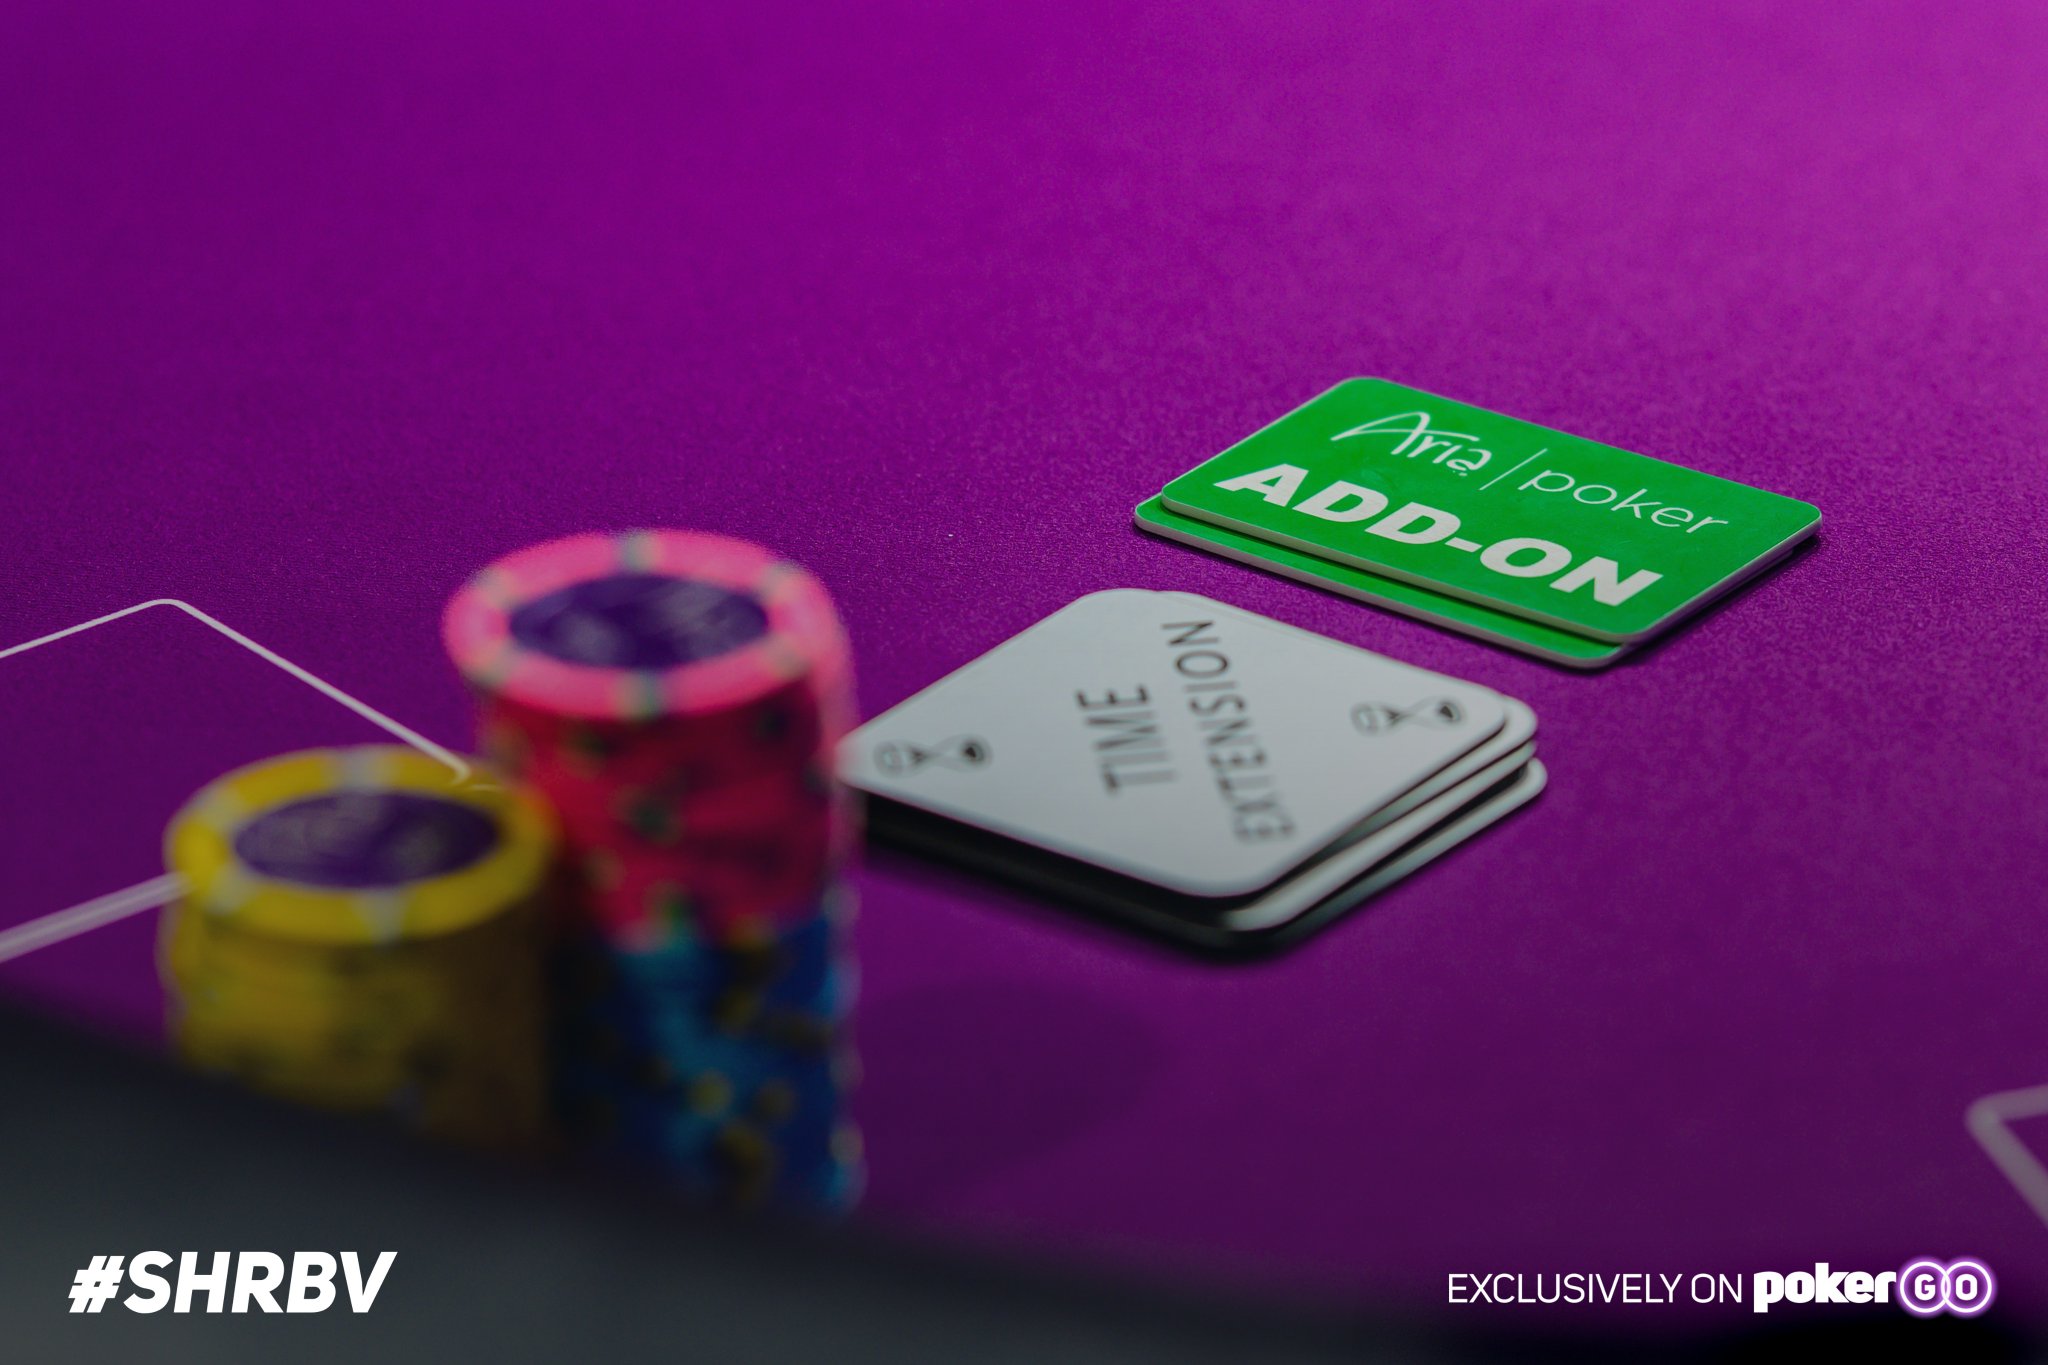 New Add-On Format Adds Action at Super High Roller Bowl: Mixed Reviews